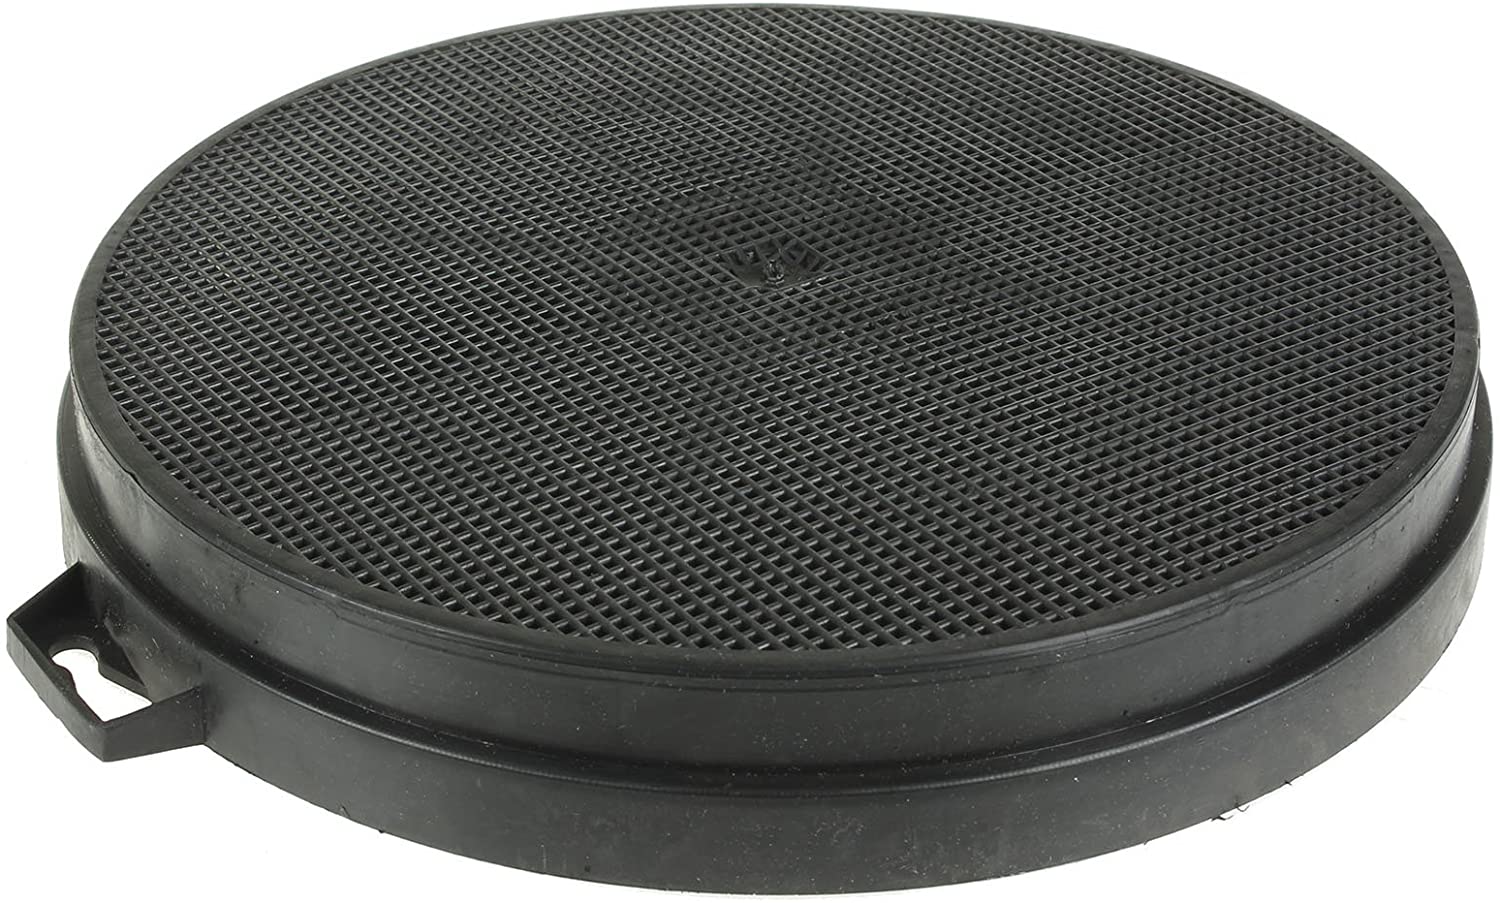 Carbon Charcoal Vent Filter for Hygena Cooker Extractor Hood